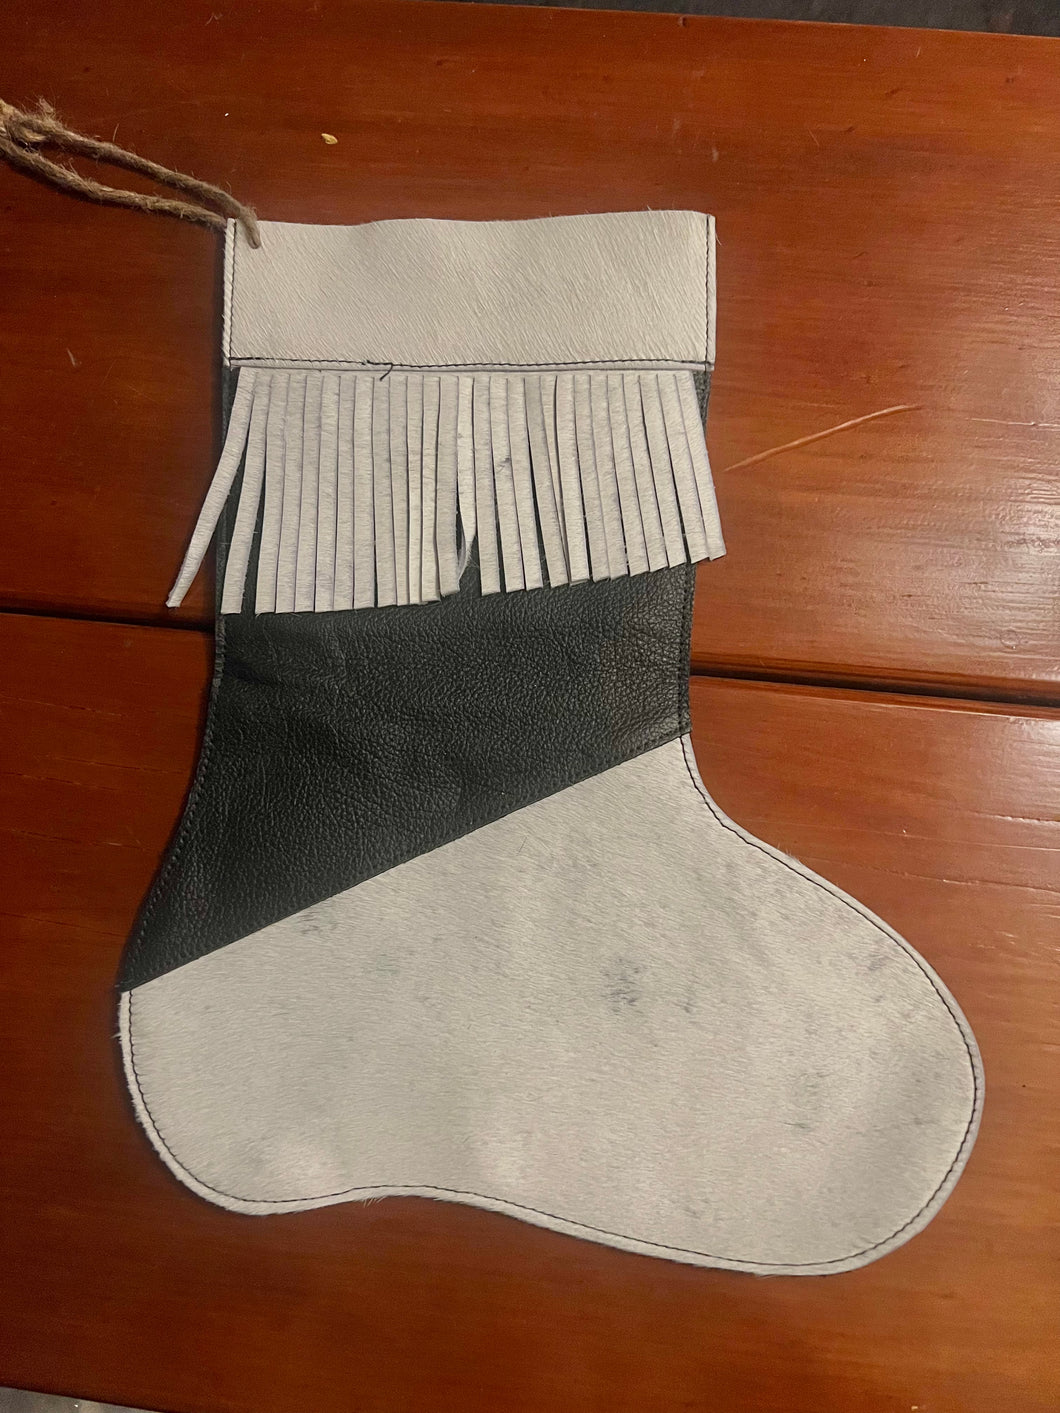 Cowhide stocking, white hide, black leather